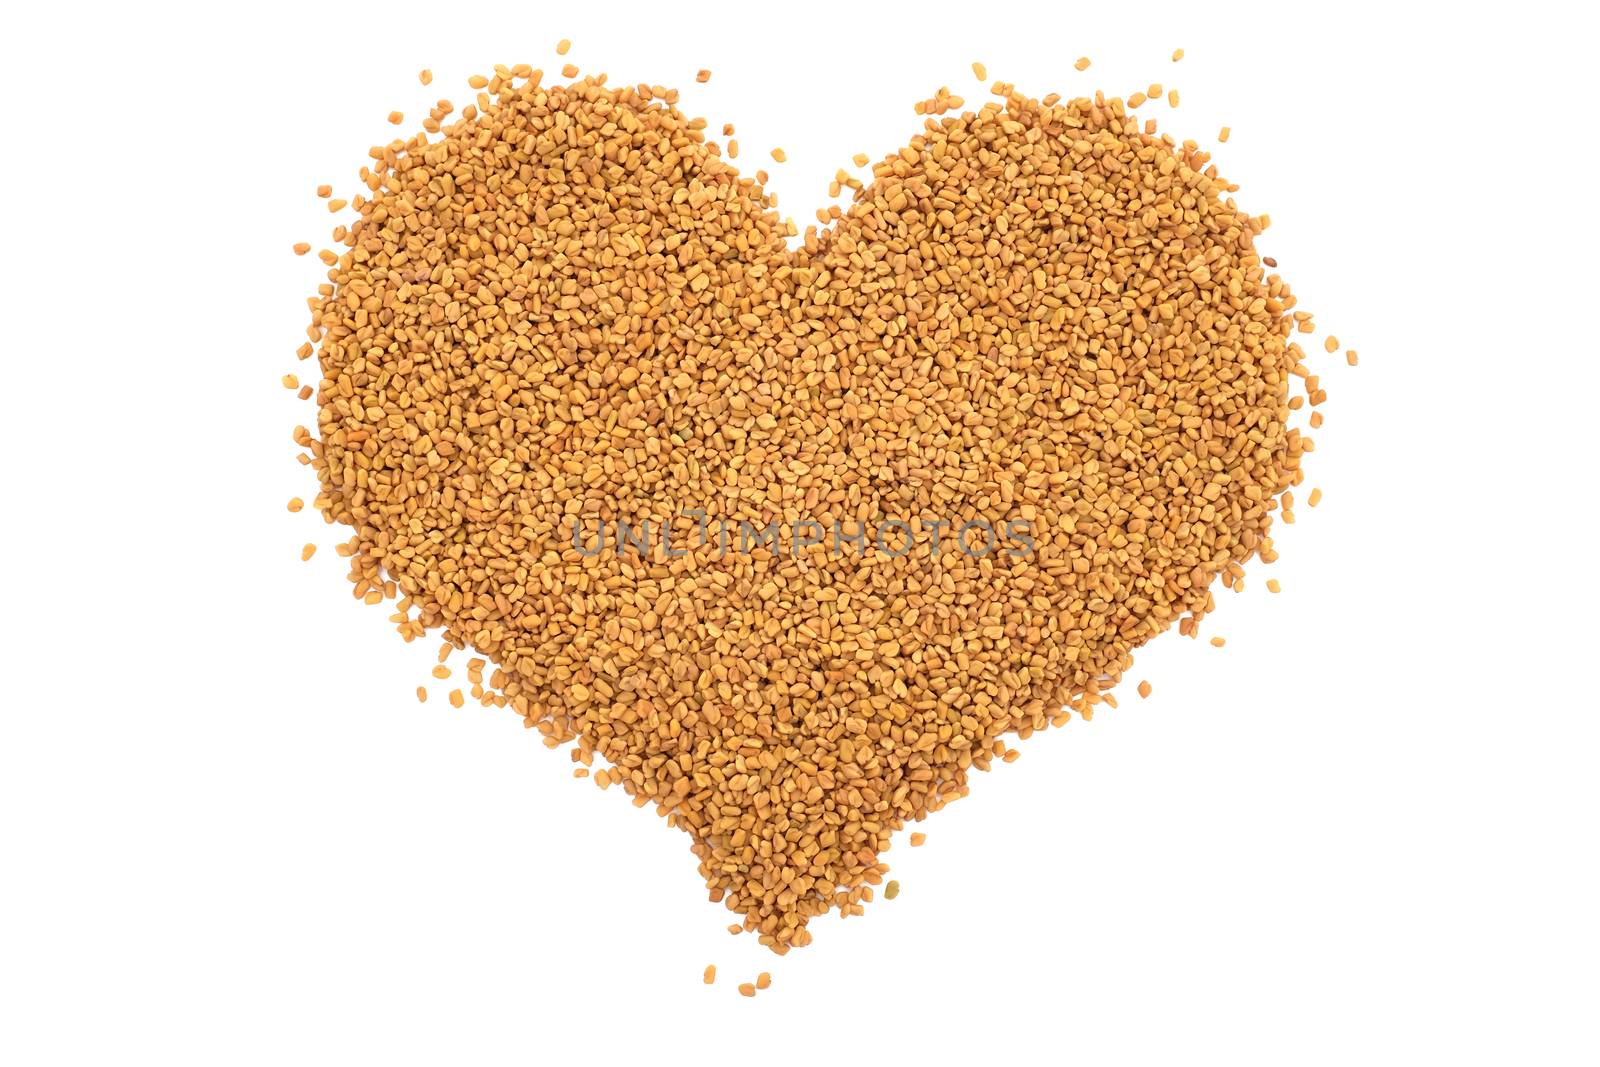 Dried fenugreek seeds in a heart shape, isolated on a white background